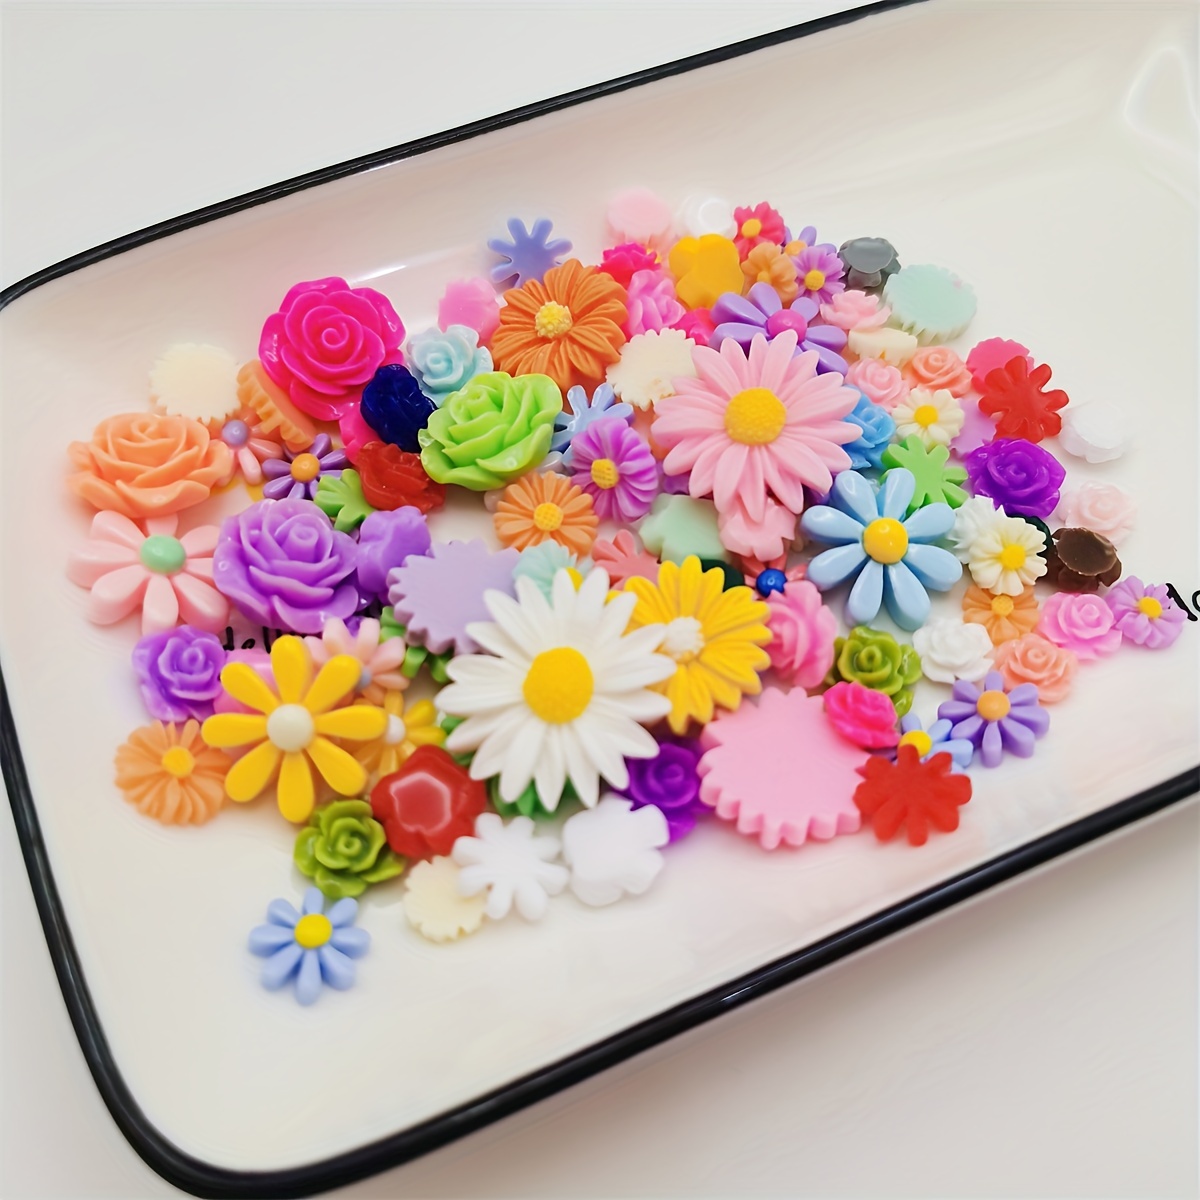 900pcs Colorful Buttons, Plastic Craft Buttons, Doll Buttons - Round, Mixed  Sizes & Colors for Crafting, Sewing, Children DIY, Painting, Gift